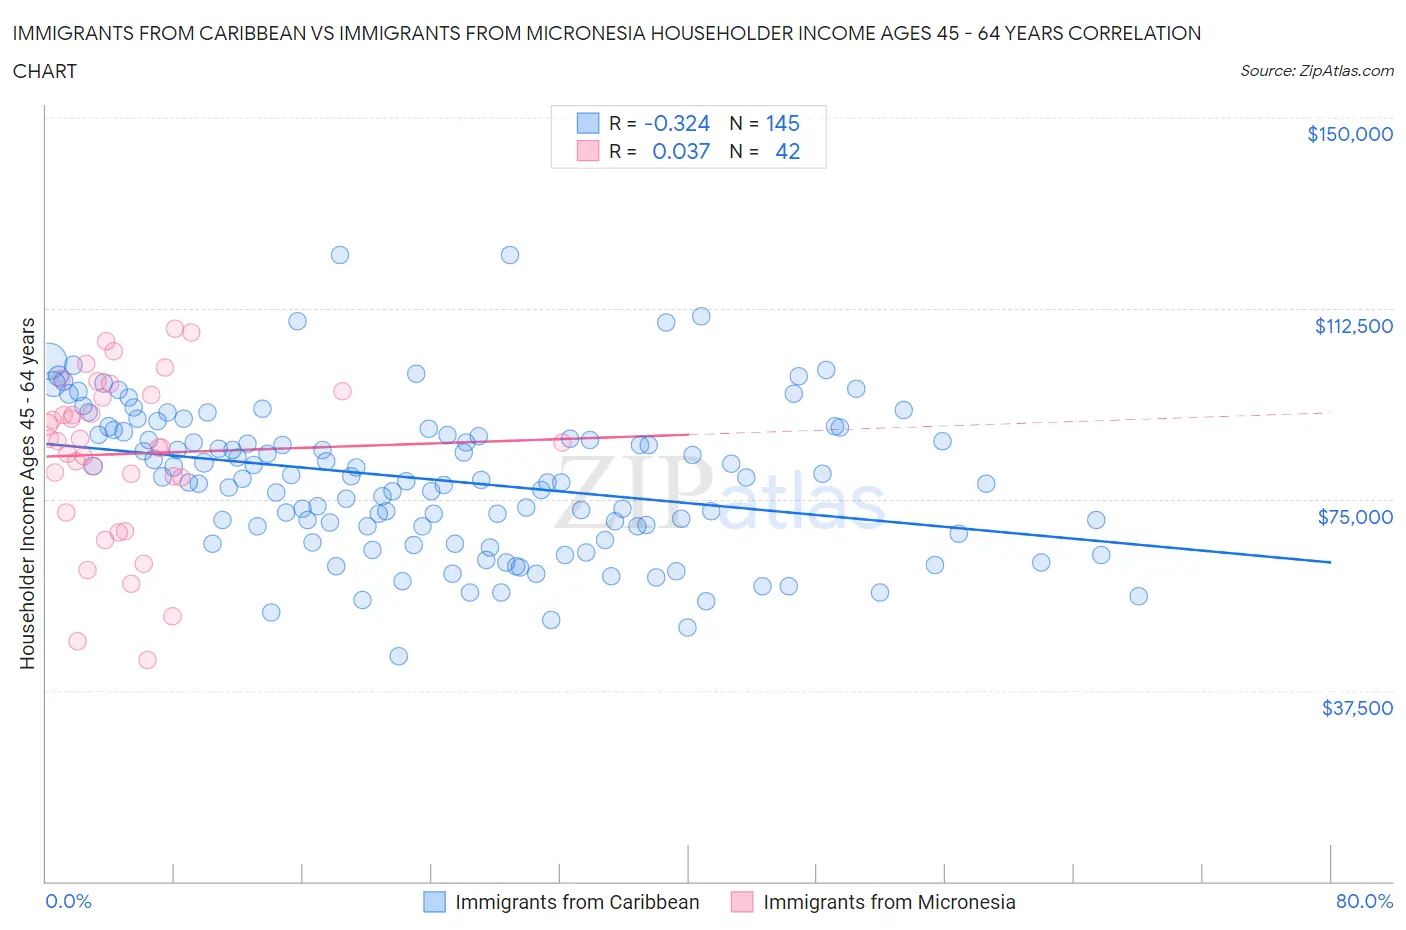 Immigrants from Caribbean vs Immigrants from Micronesia Householder Income Ages 45 - 64 years